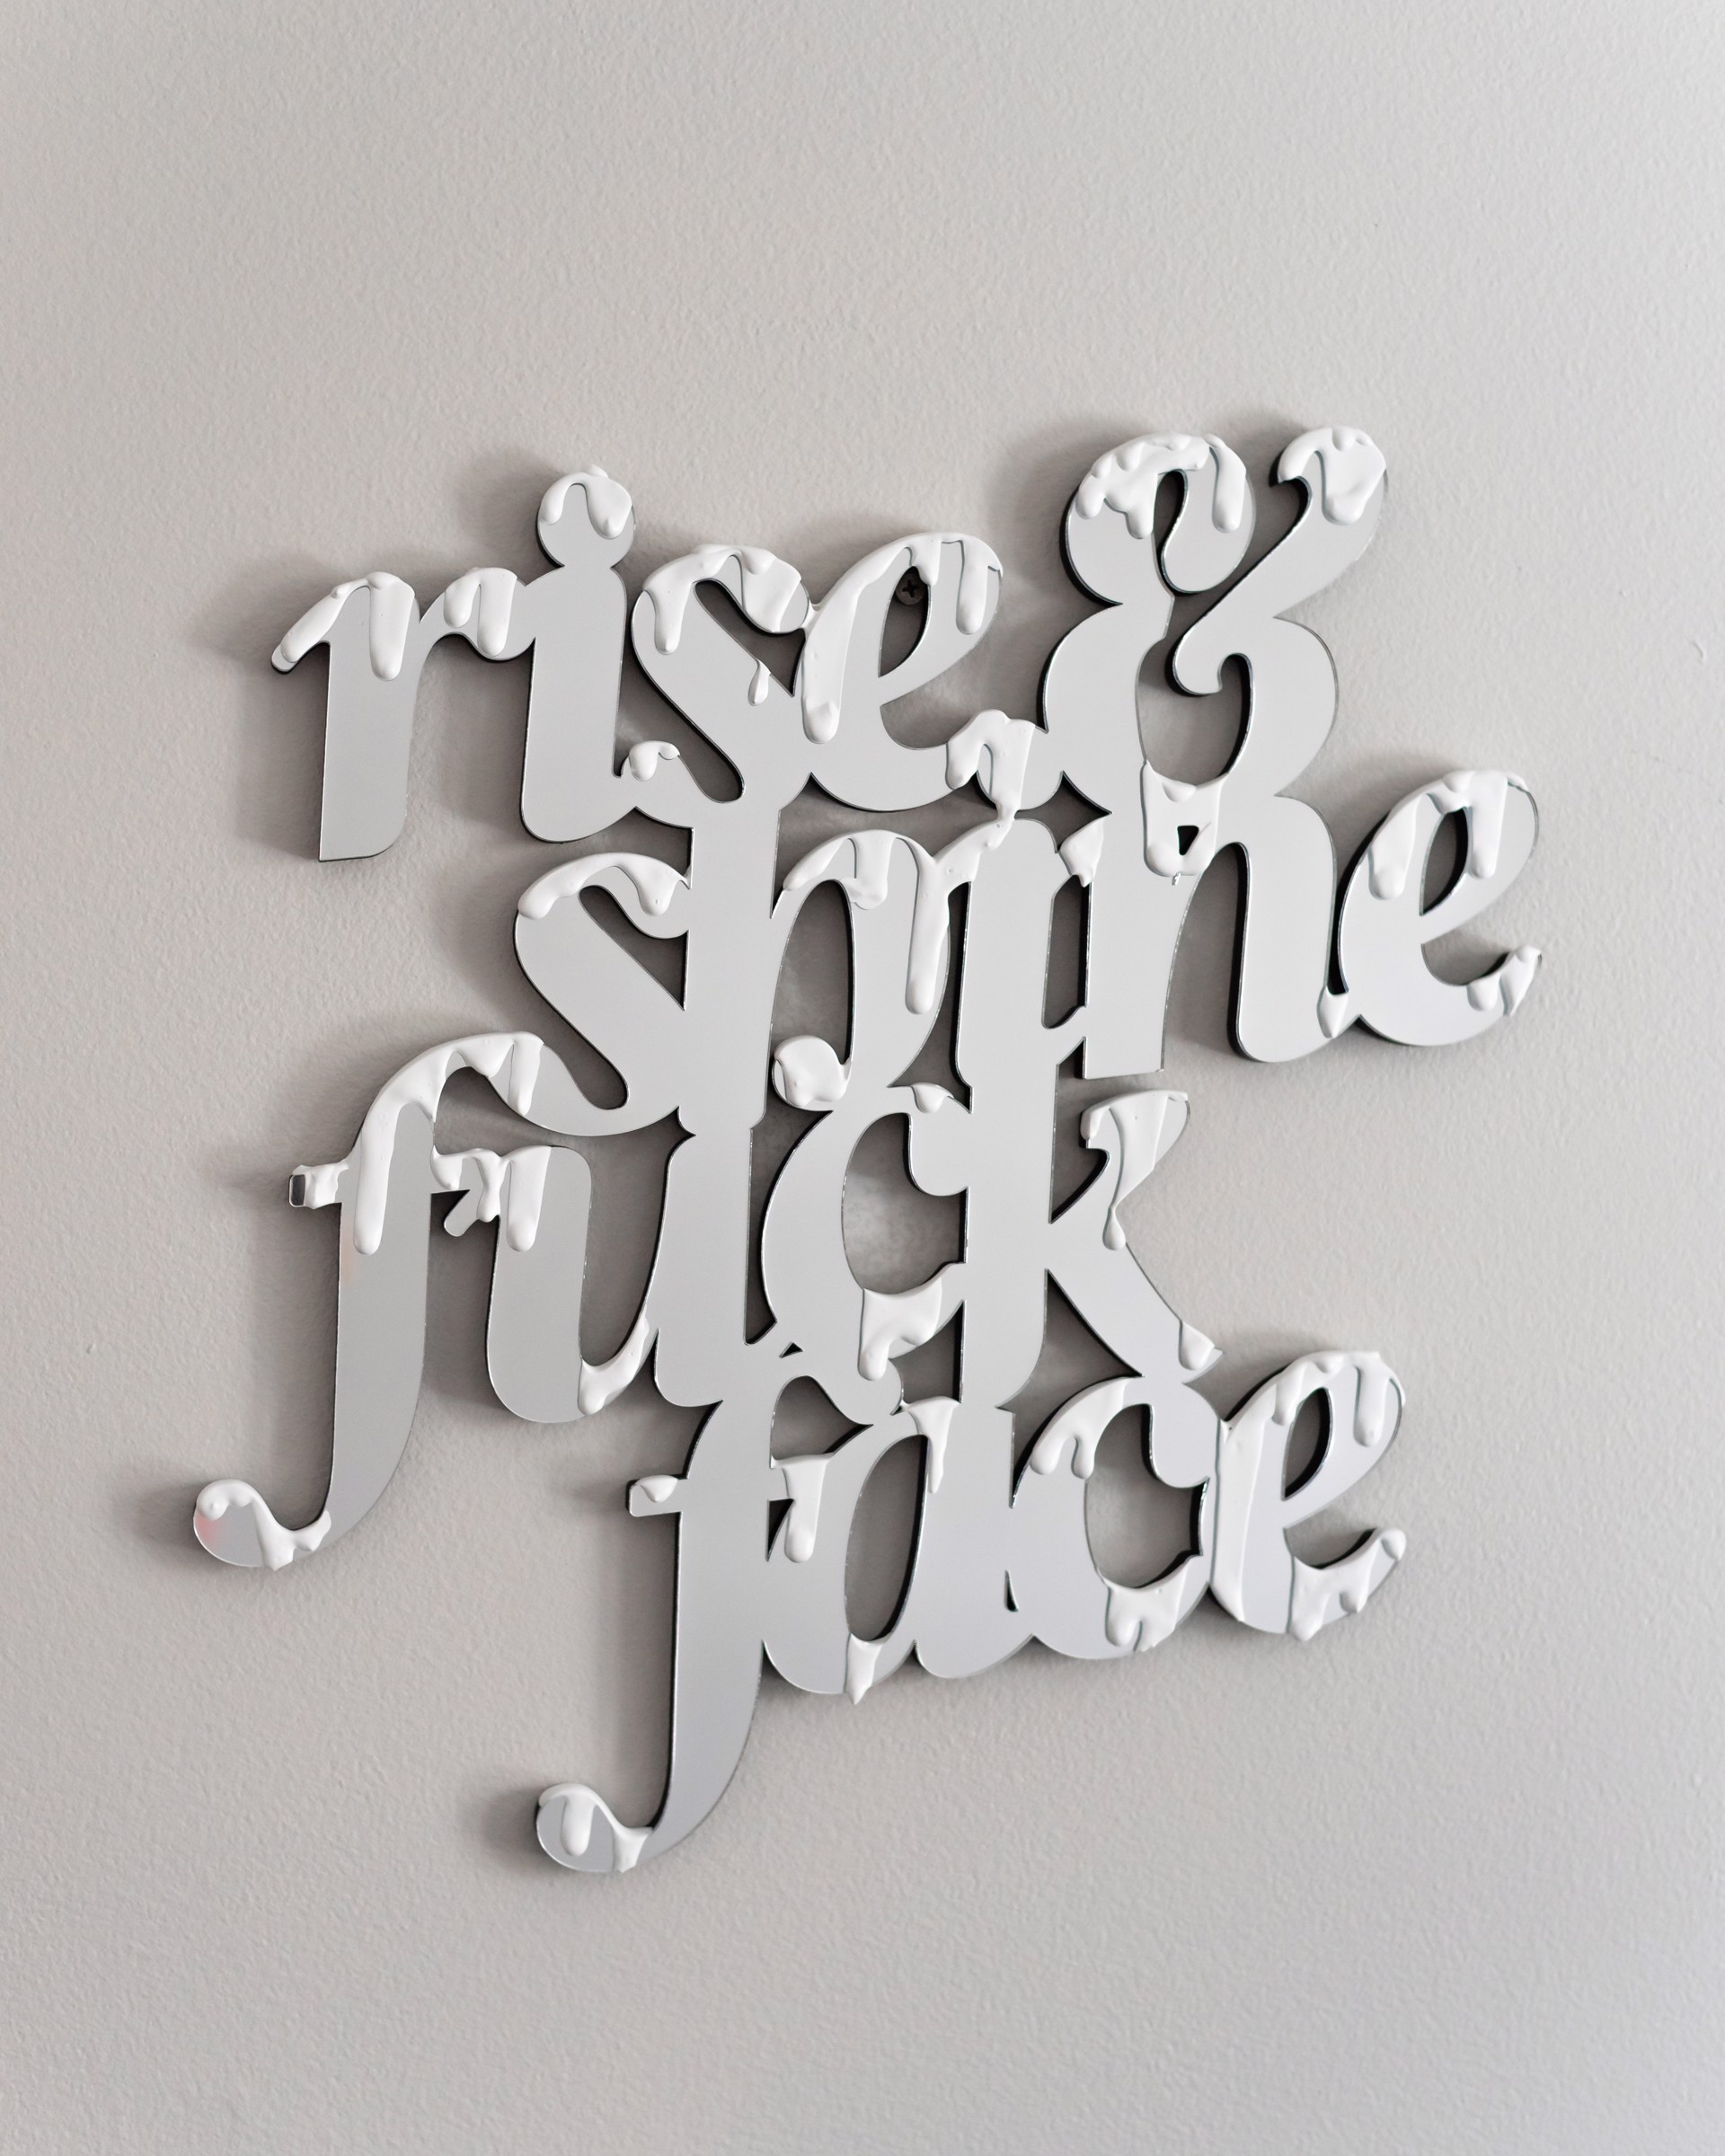 Rise & Shine F**** Face by Ryan Labrosse